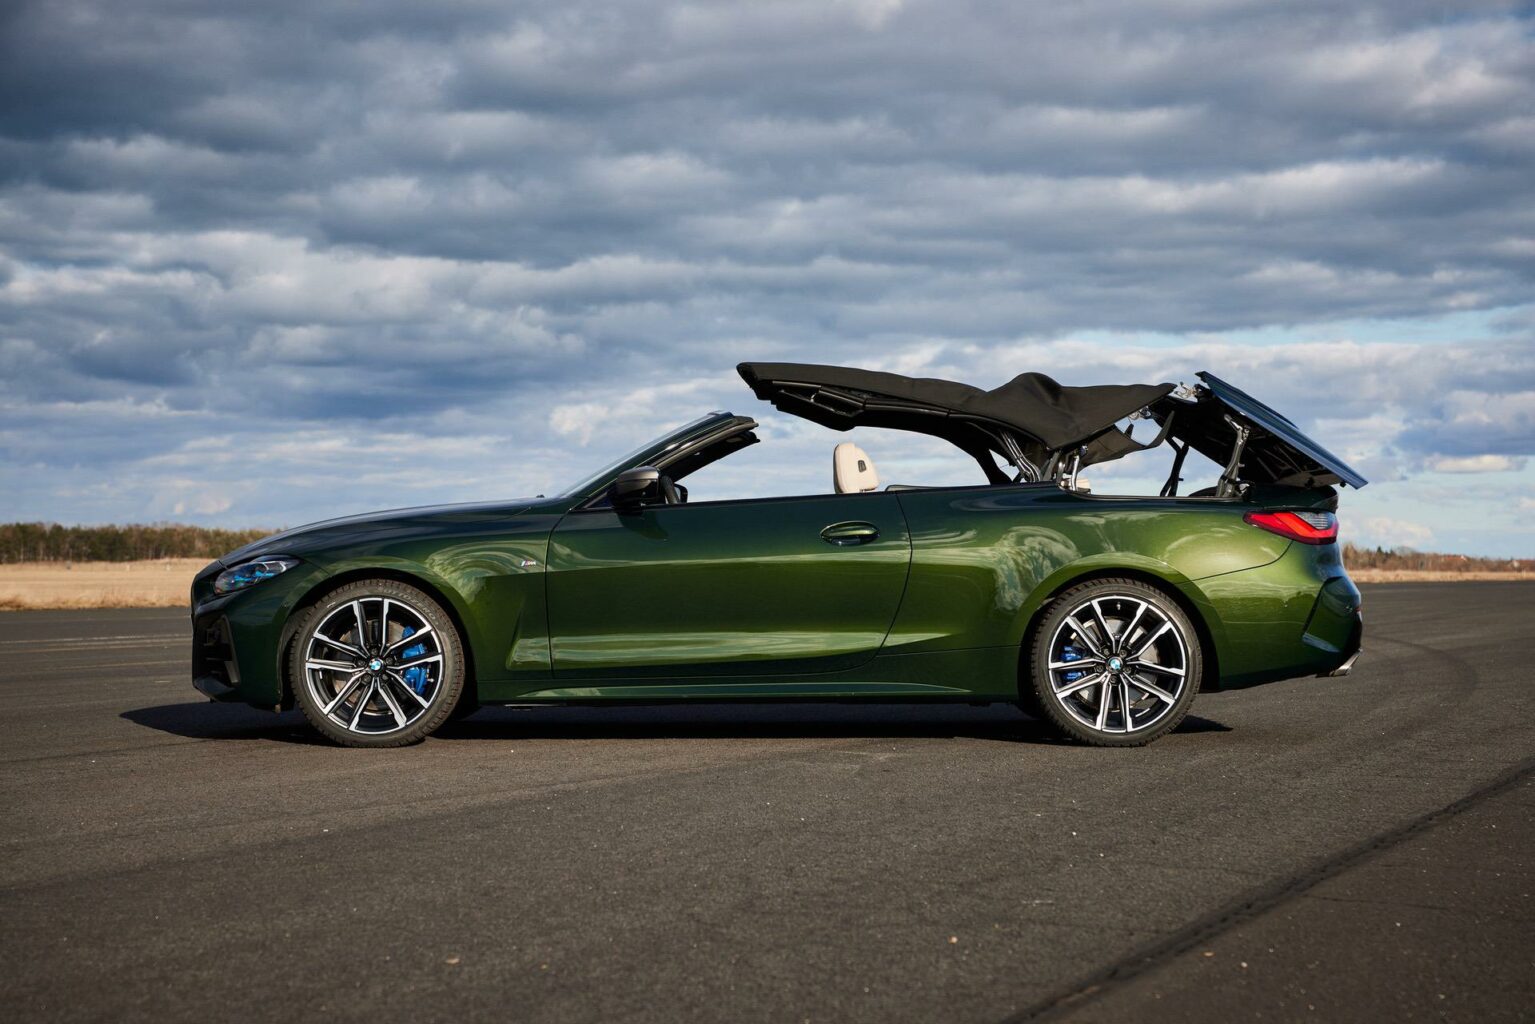 We take a closer look at the 2021 BMW M440i xDrive Convertible - VIDEO